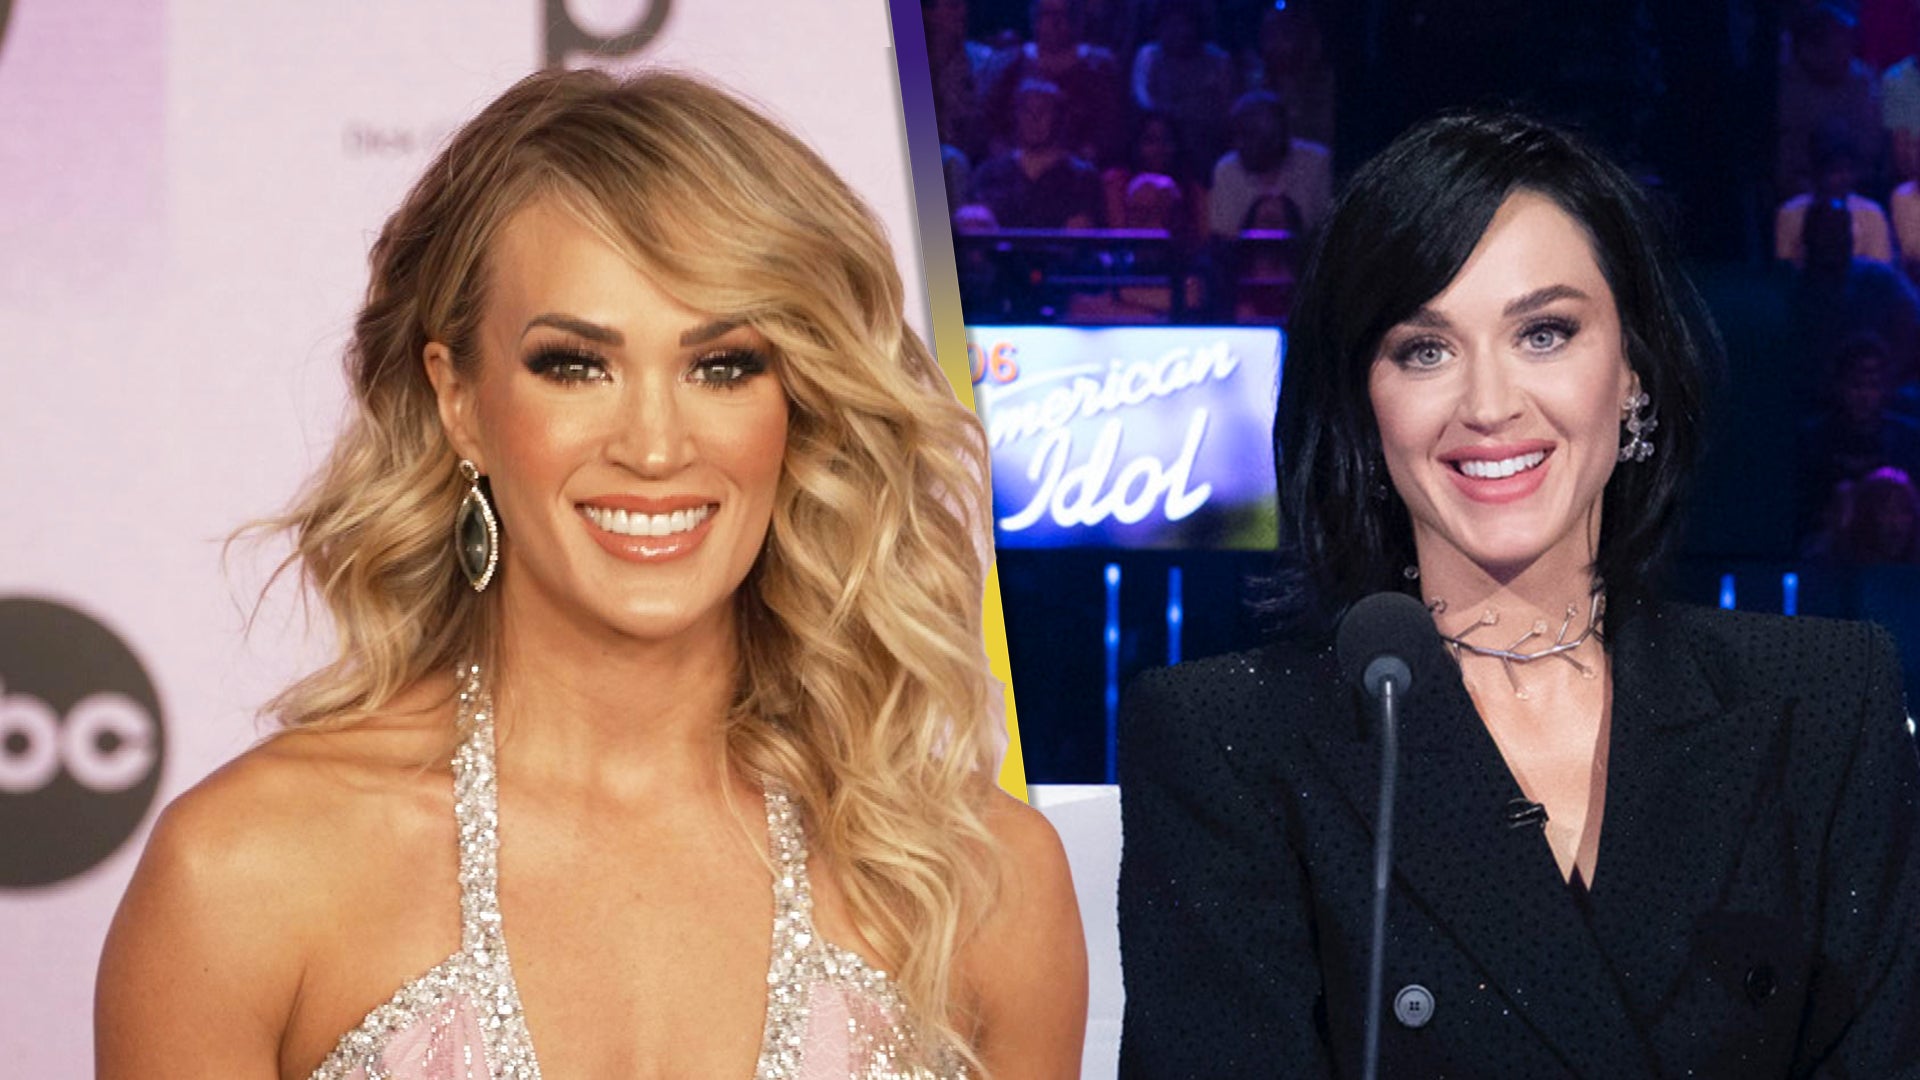 Carrie Underwood to Replace Katy Perry as Judge on 'American Idol'  